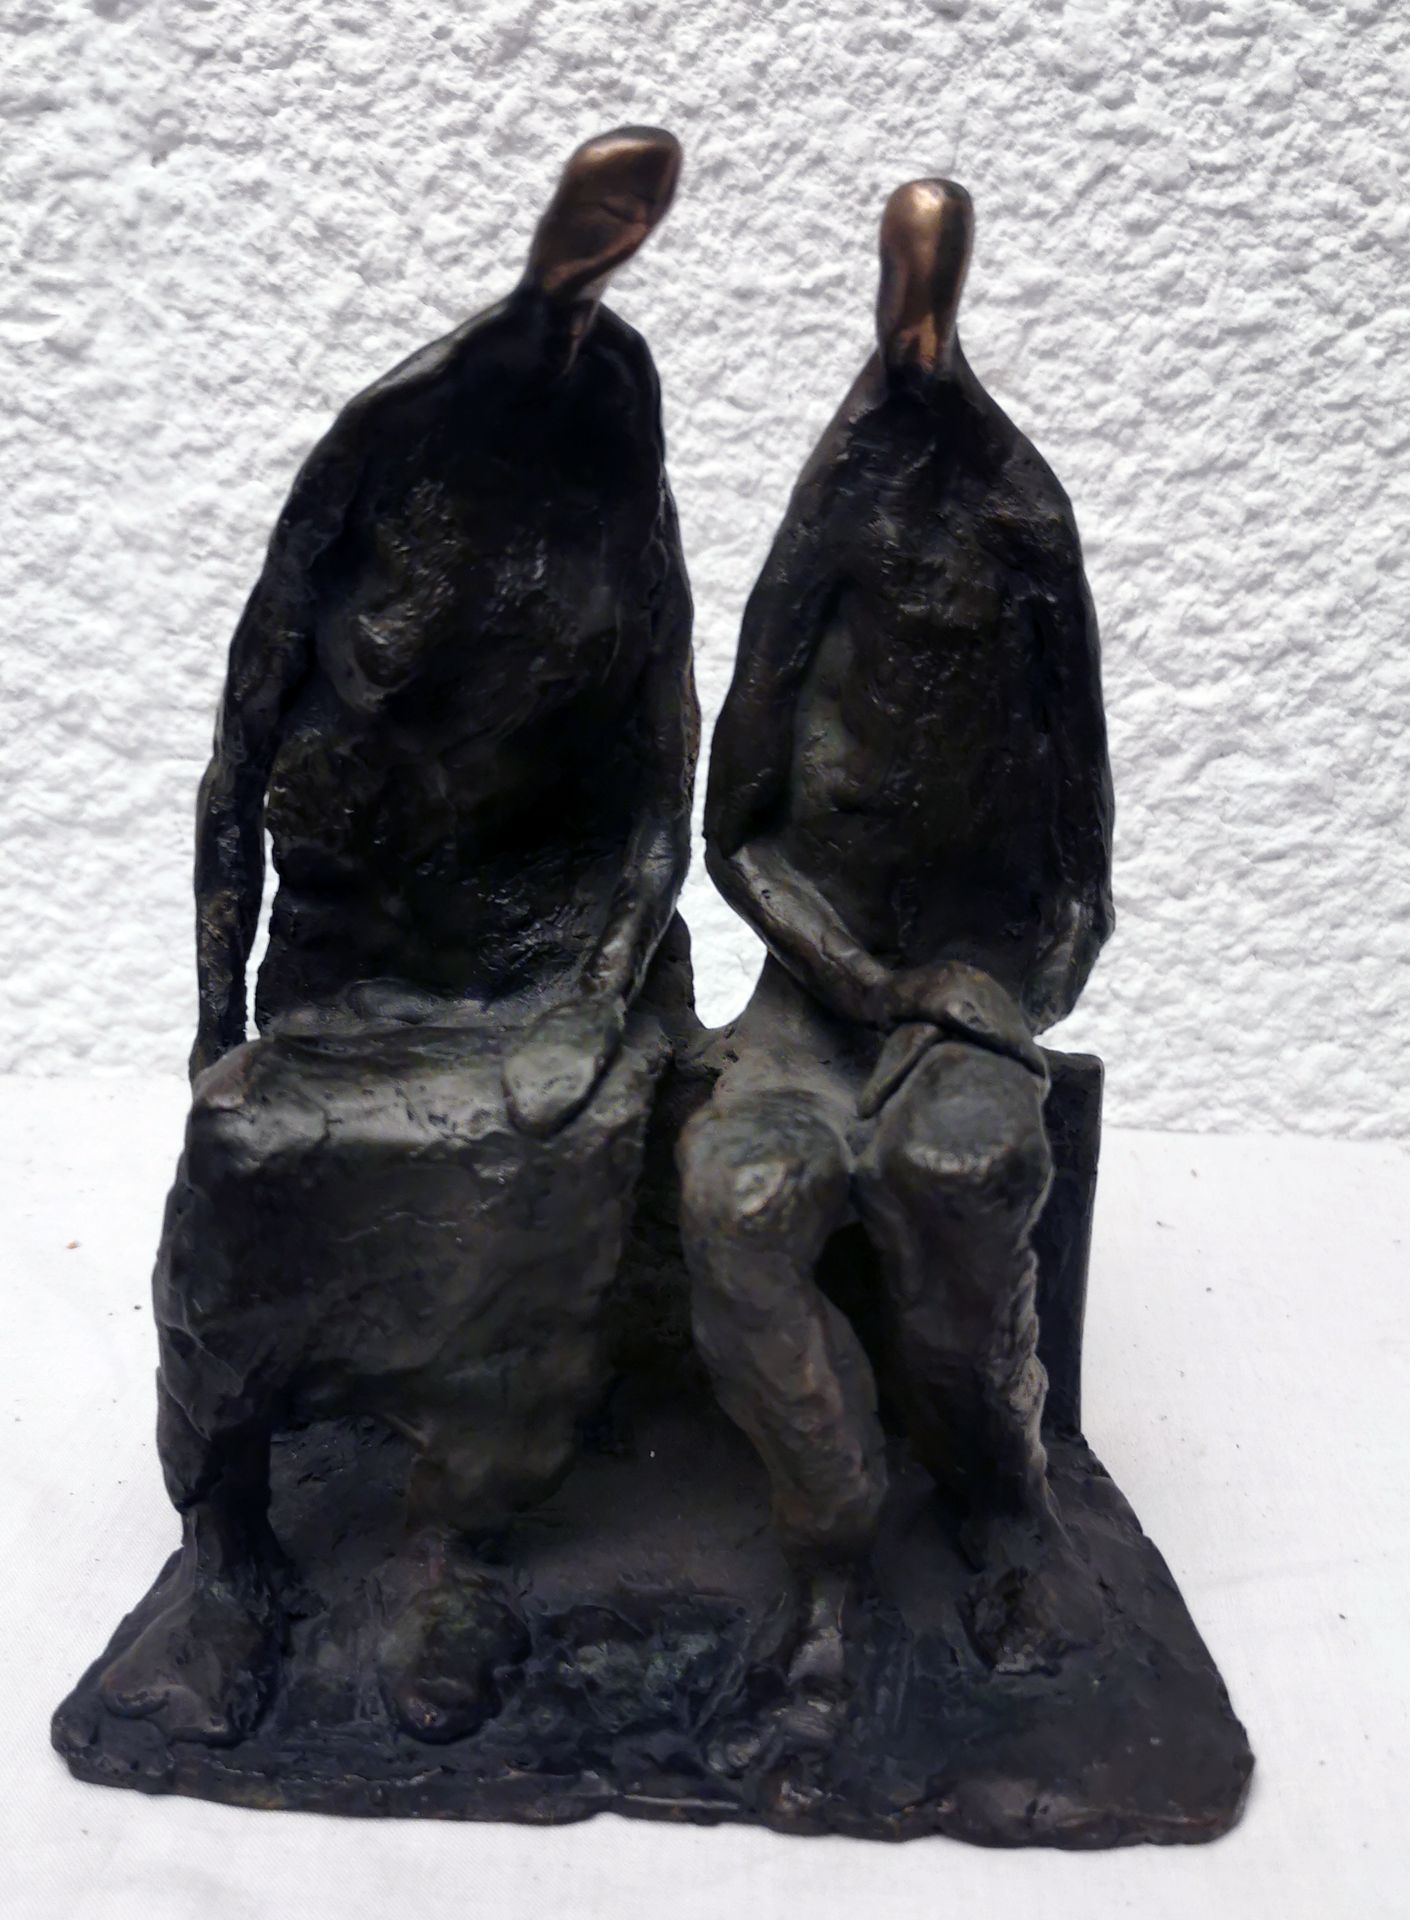 AYVAIAN AYVAIAN SIGNED ON THE BACK "306 SEATED COUPLE" UNIQUE SCULPTURE 18X13X8